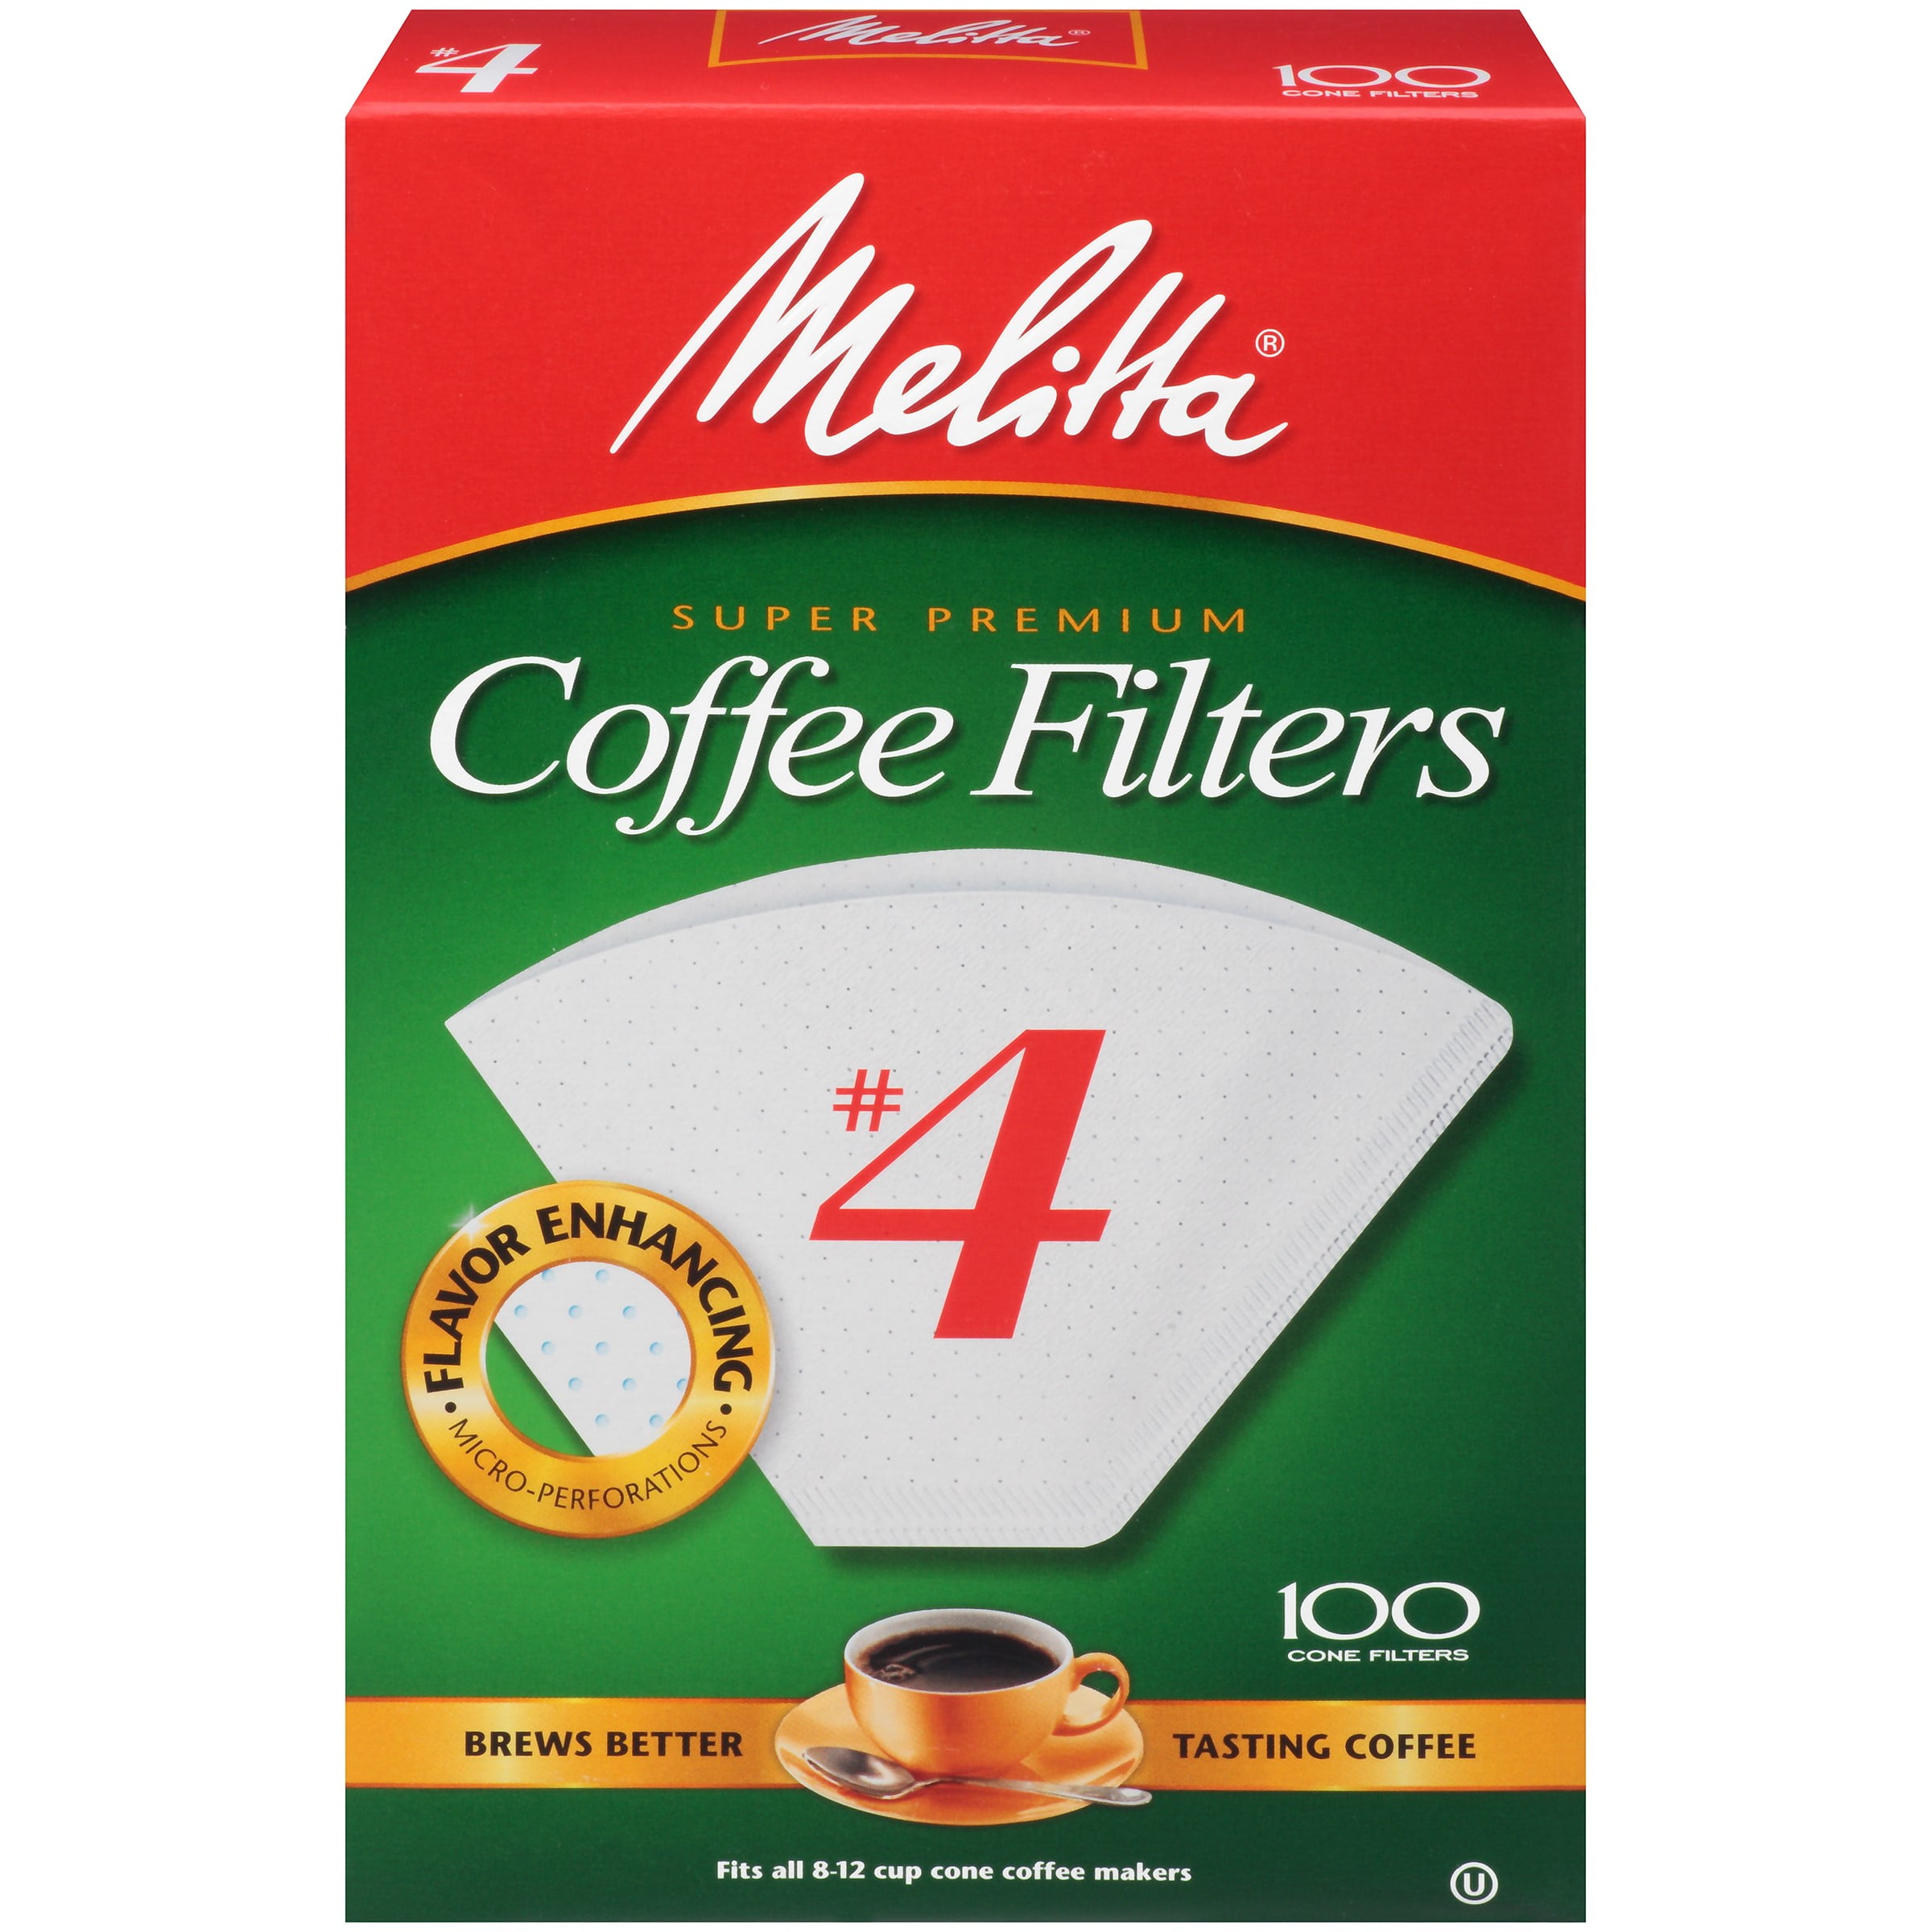 Coffee Filter Papers Size 4 cup Size 6-8 a pack of 100 Sheets 